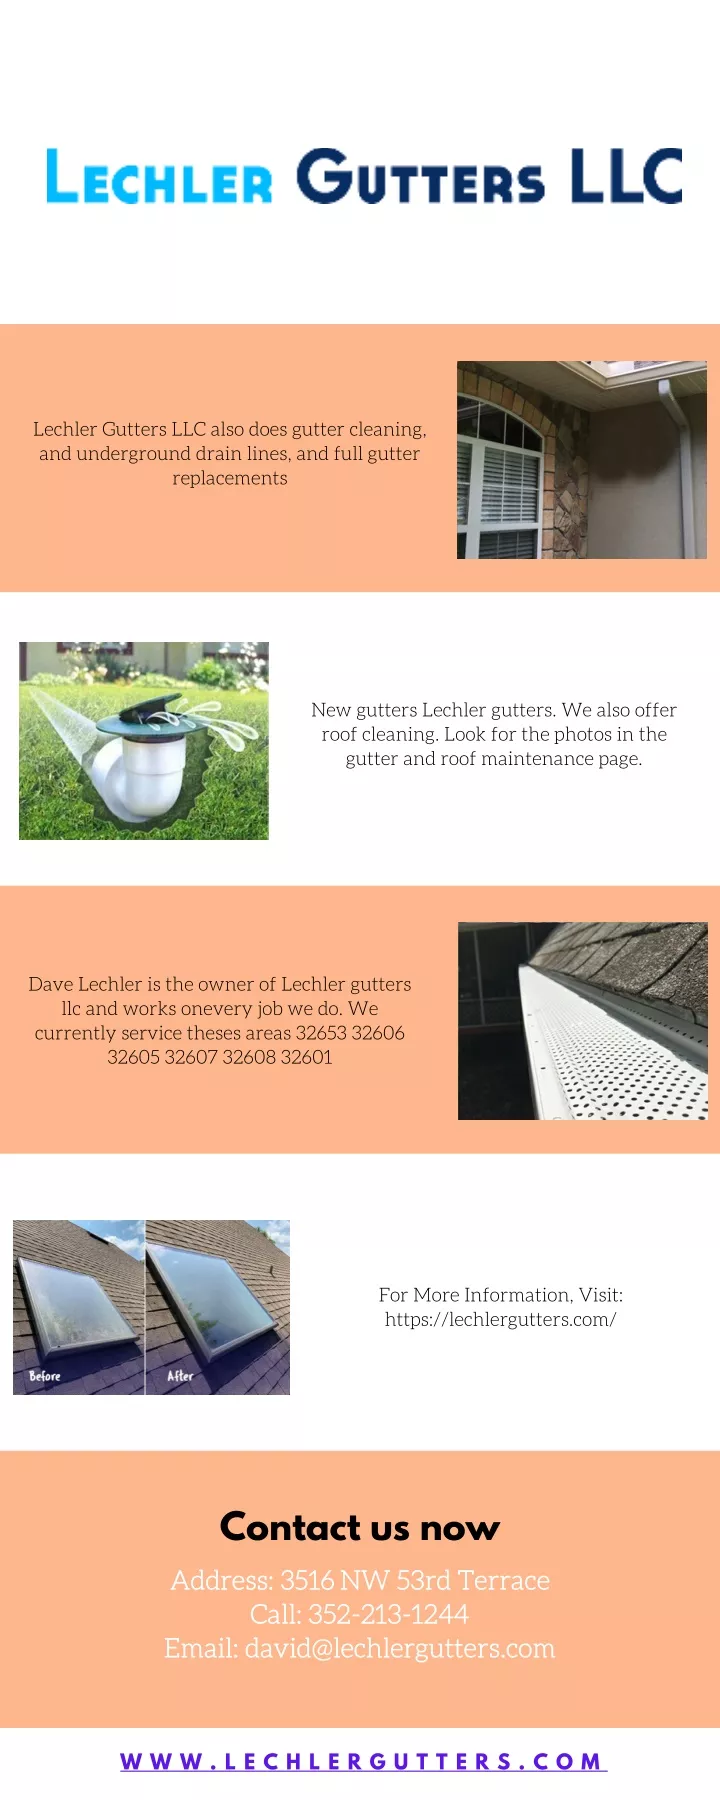 lechler gutters llc also does gutter cleaning n.